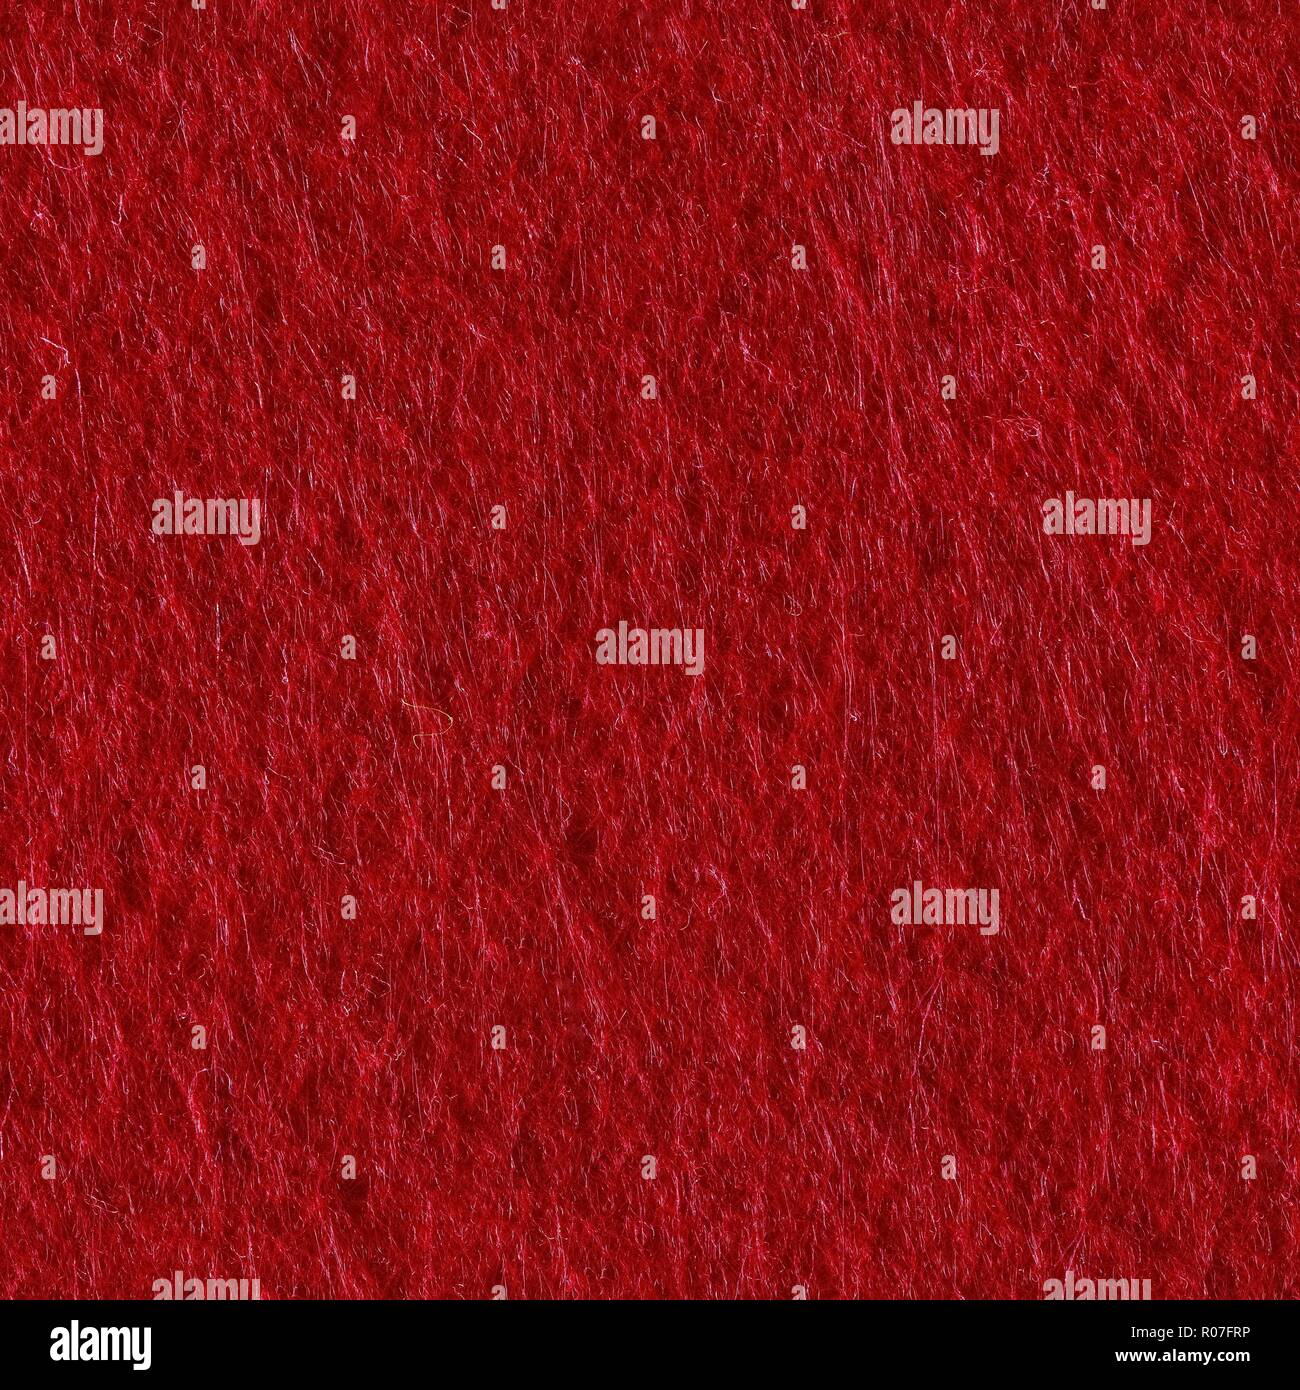 The red carpet background and texture. Seamless square texture. Tile ready. Stock Photo